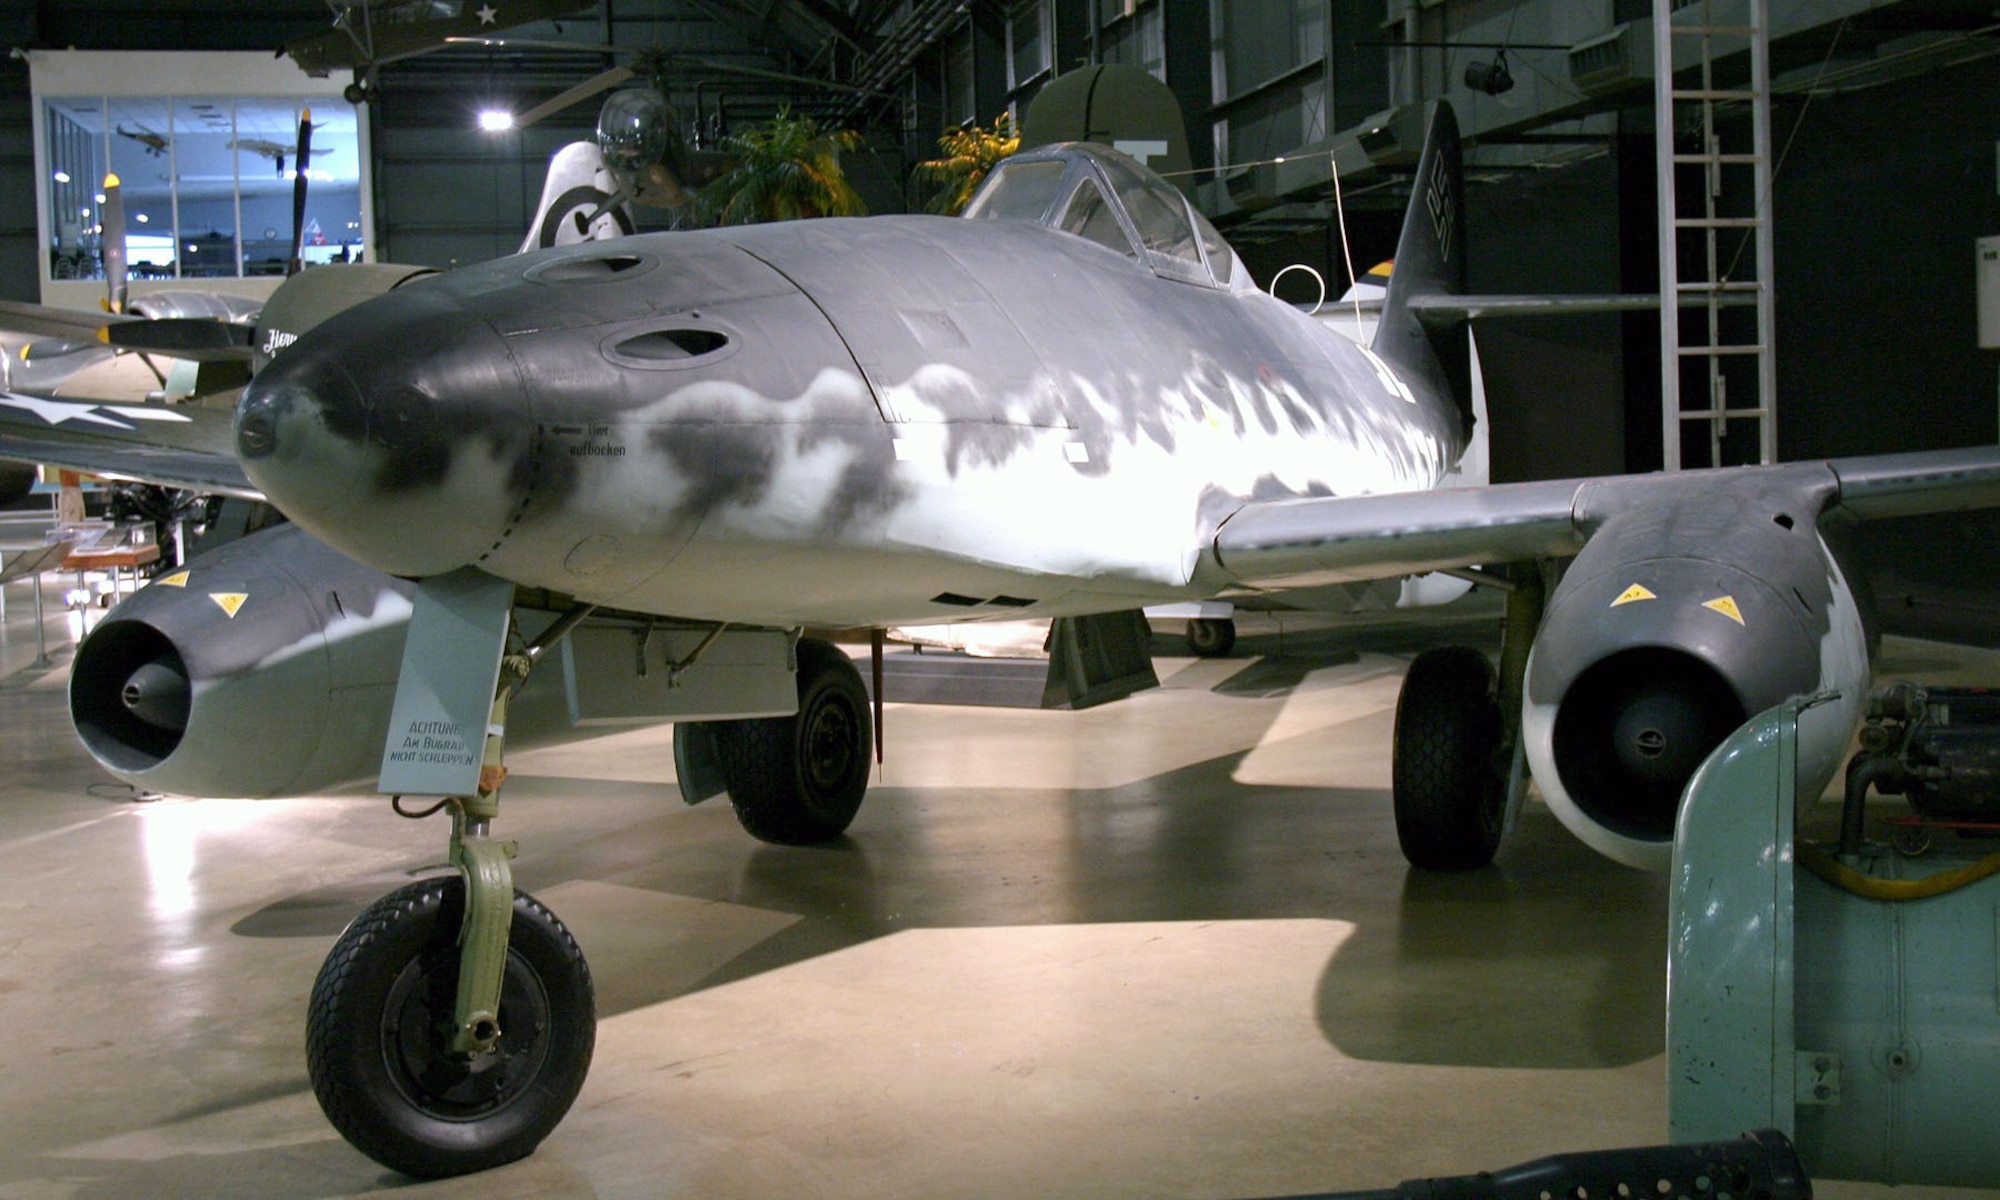 DAYTON, Ohio -- Messerschmitt Me 262A in the World War II Gallery at the National Museum of the United States Air Force. (Photo courtesy of Airshow Traveler)